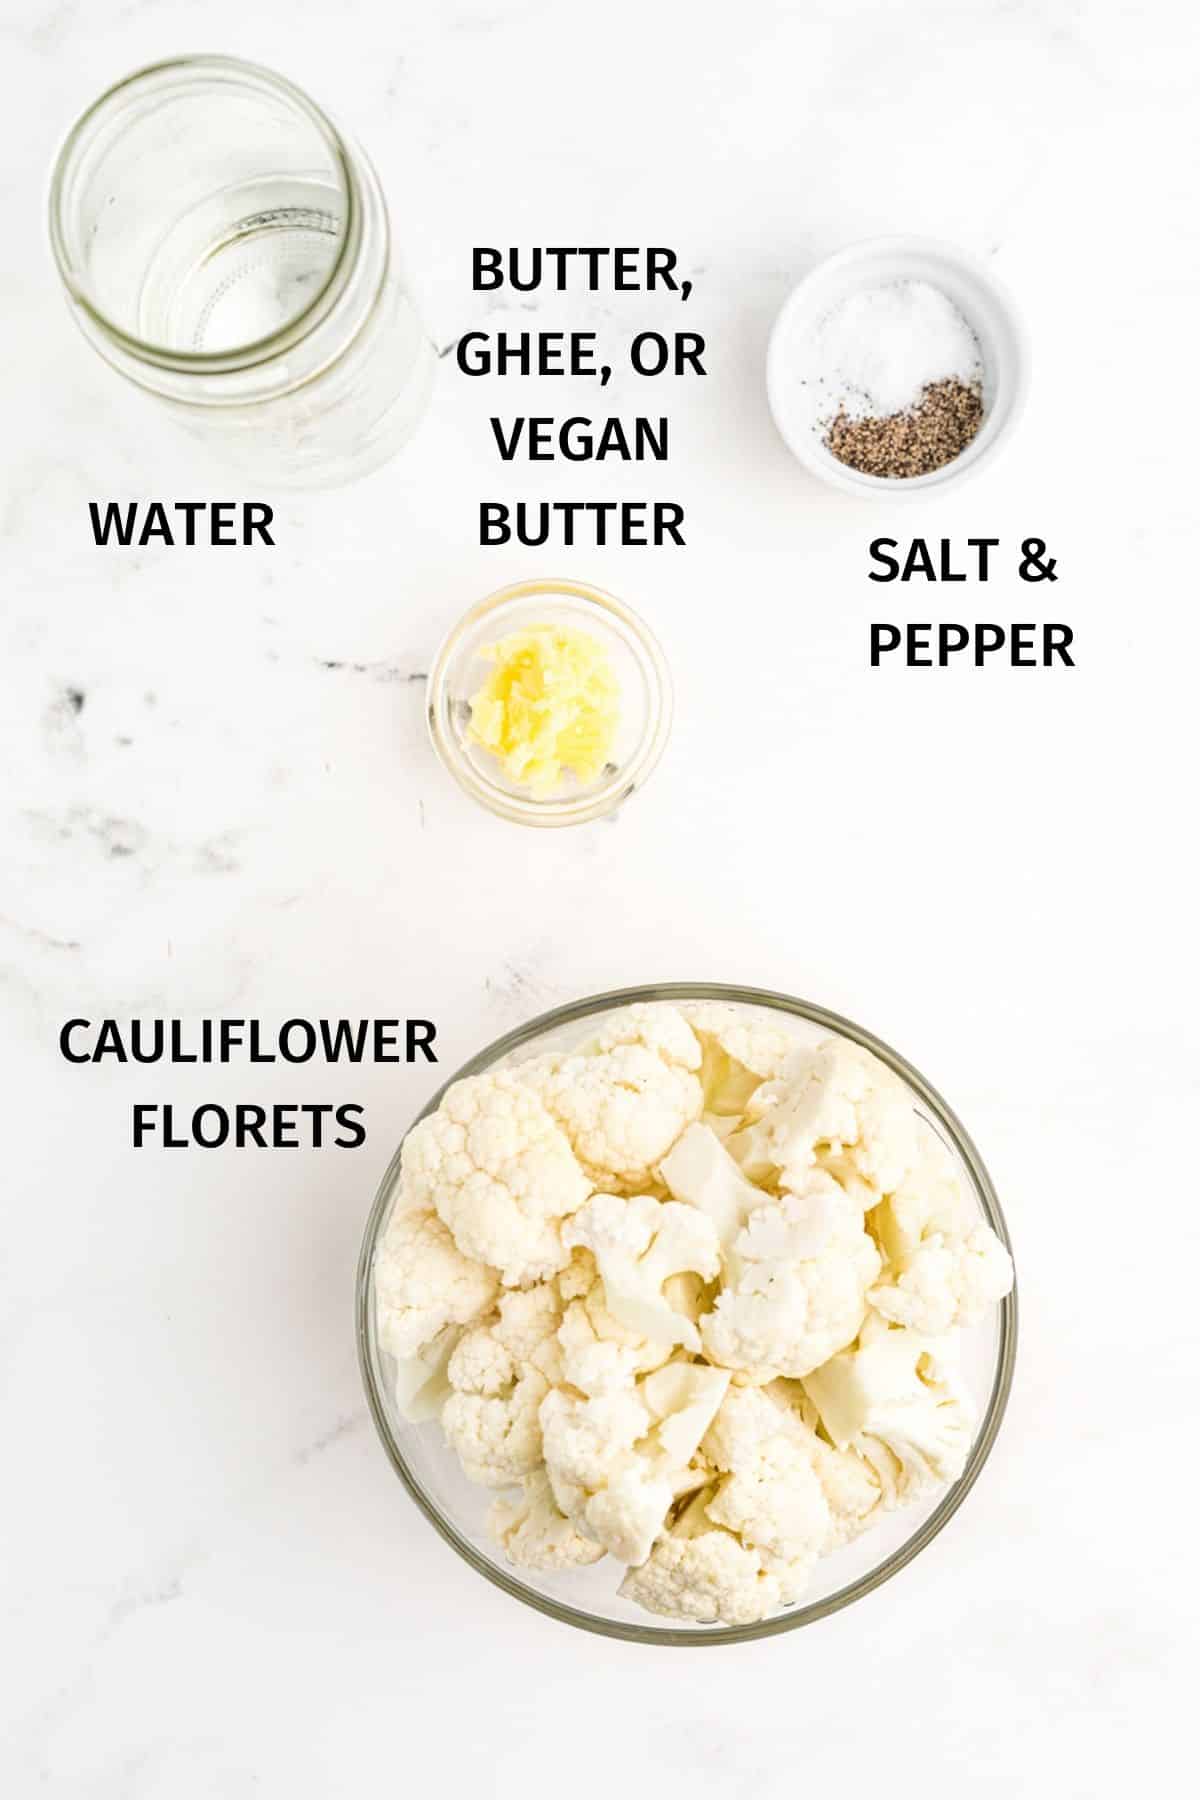 PHOTO with labeled ingredients for making instant pot cauliflower mash